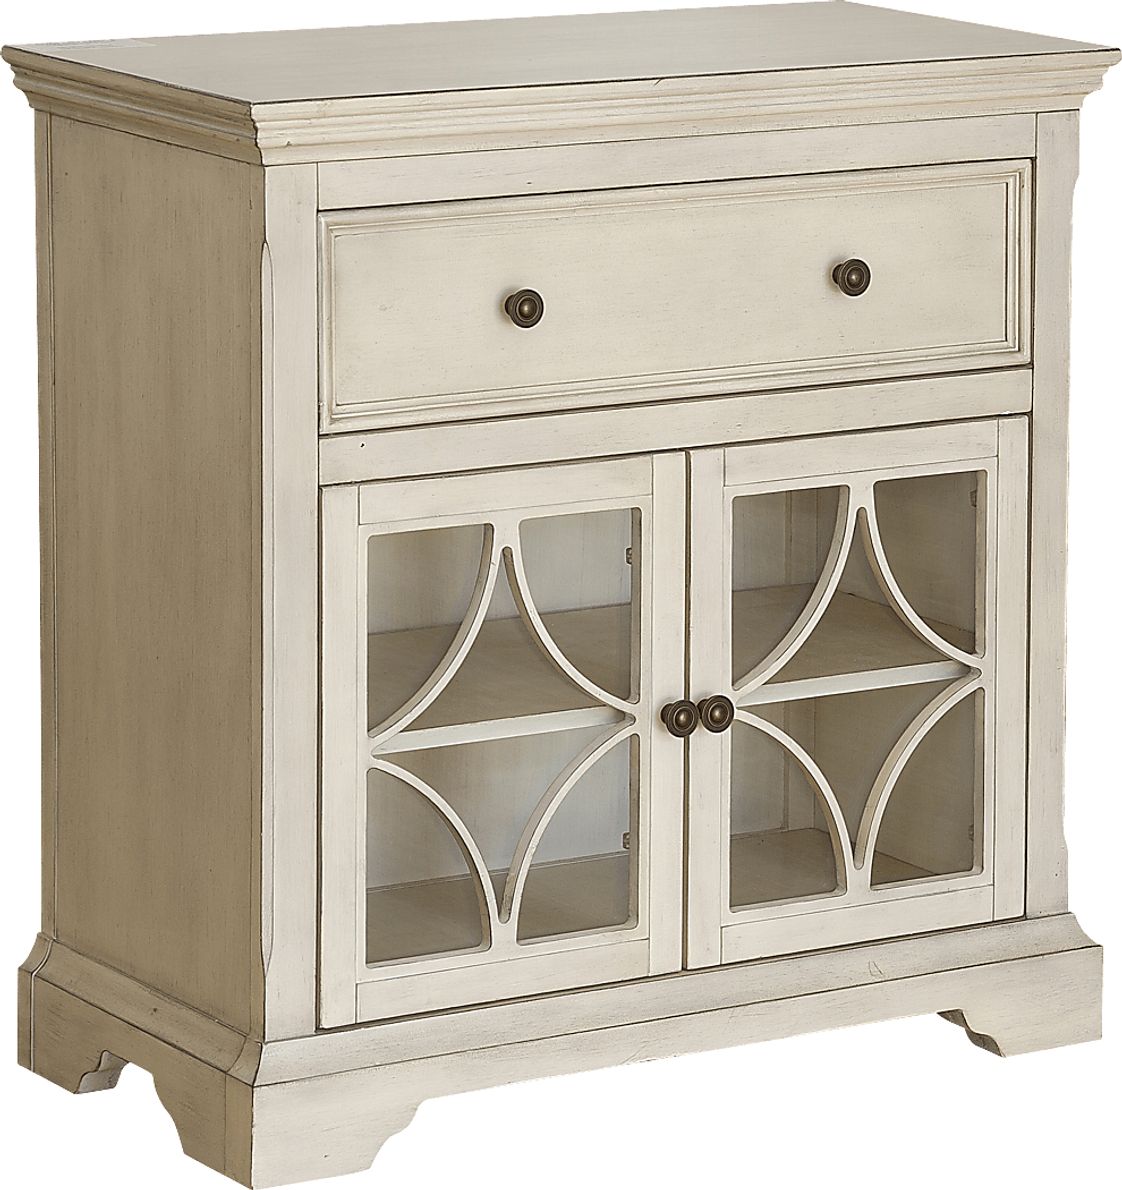 Jelicoe Cream Colors,Light Wood,White Accent Cabinet - Rooms To Go